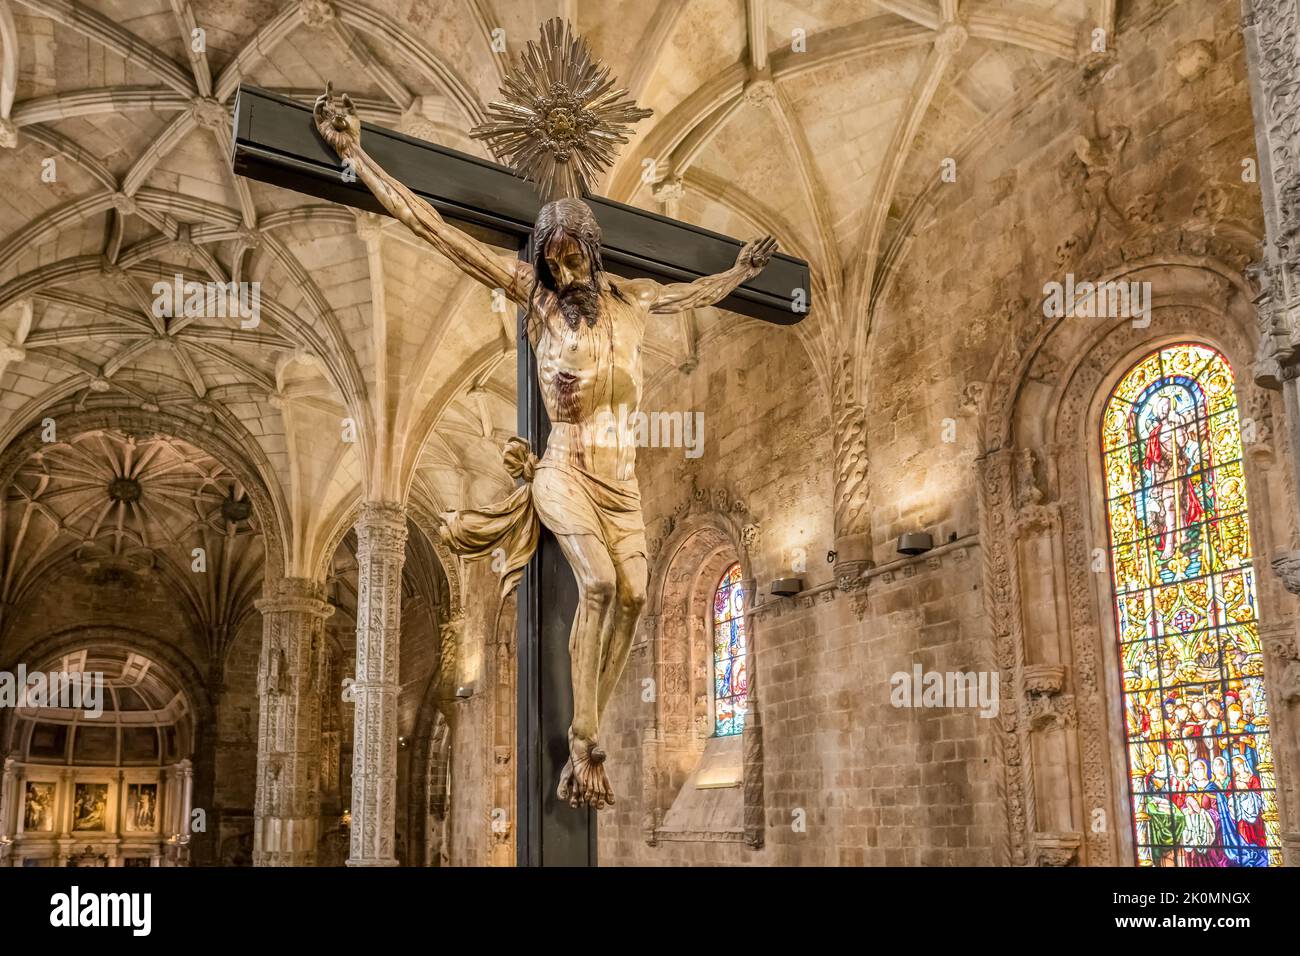 Jesus Christ on the cross in Jeronimos monastery in Lisbon, Portugal. Stock Photo